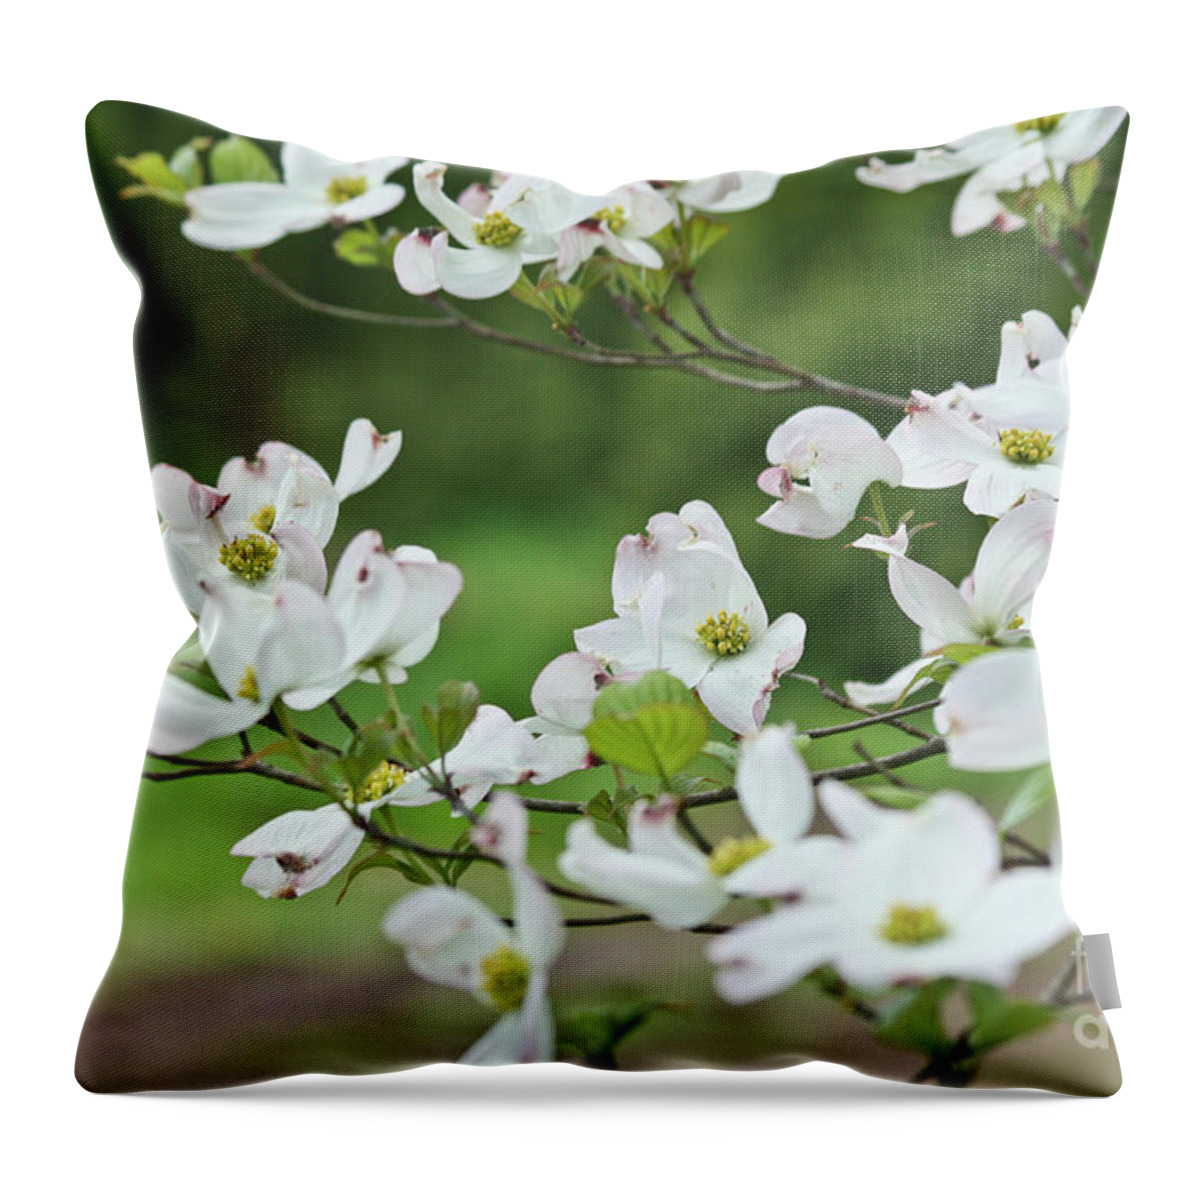 Gardens Throw Pillow featuring the photograph White Flowering Dogwood by Ann Murphy